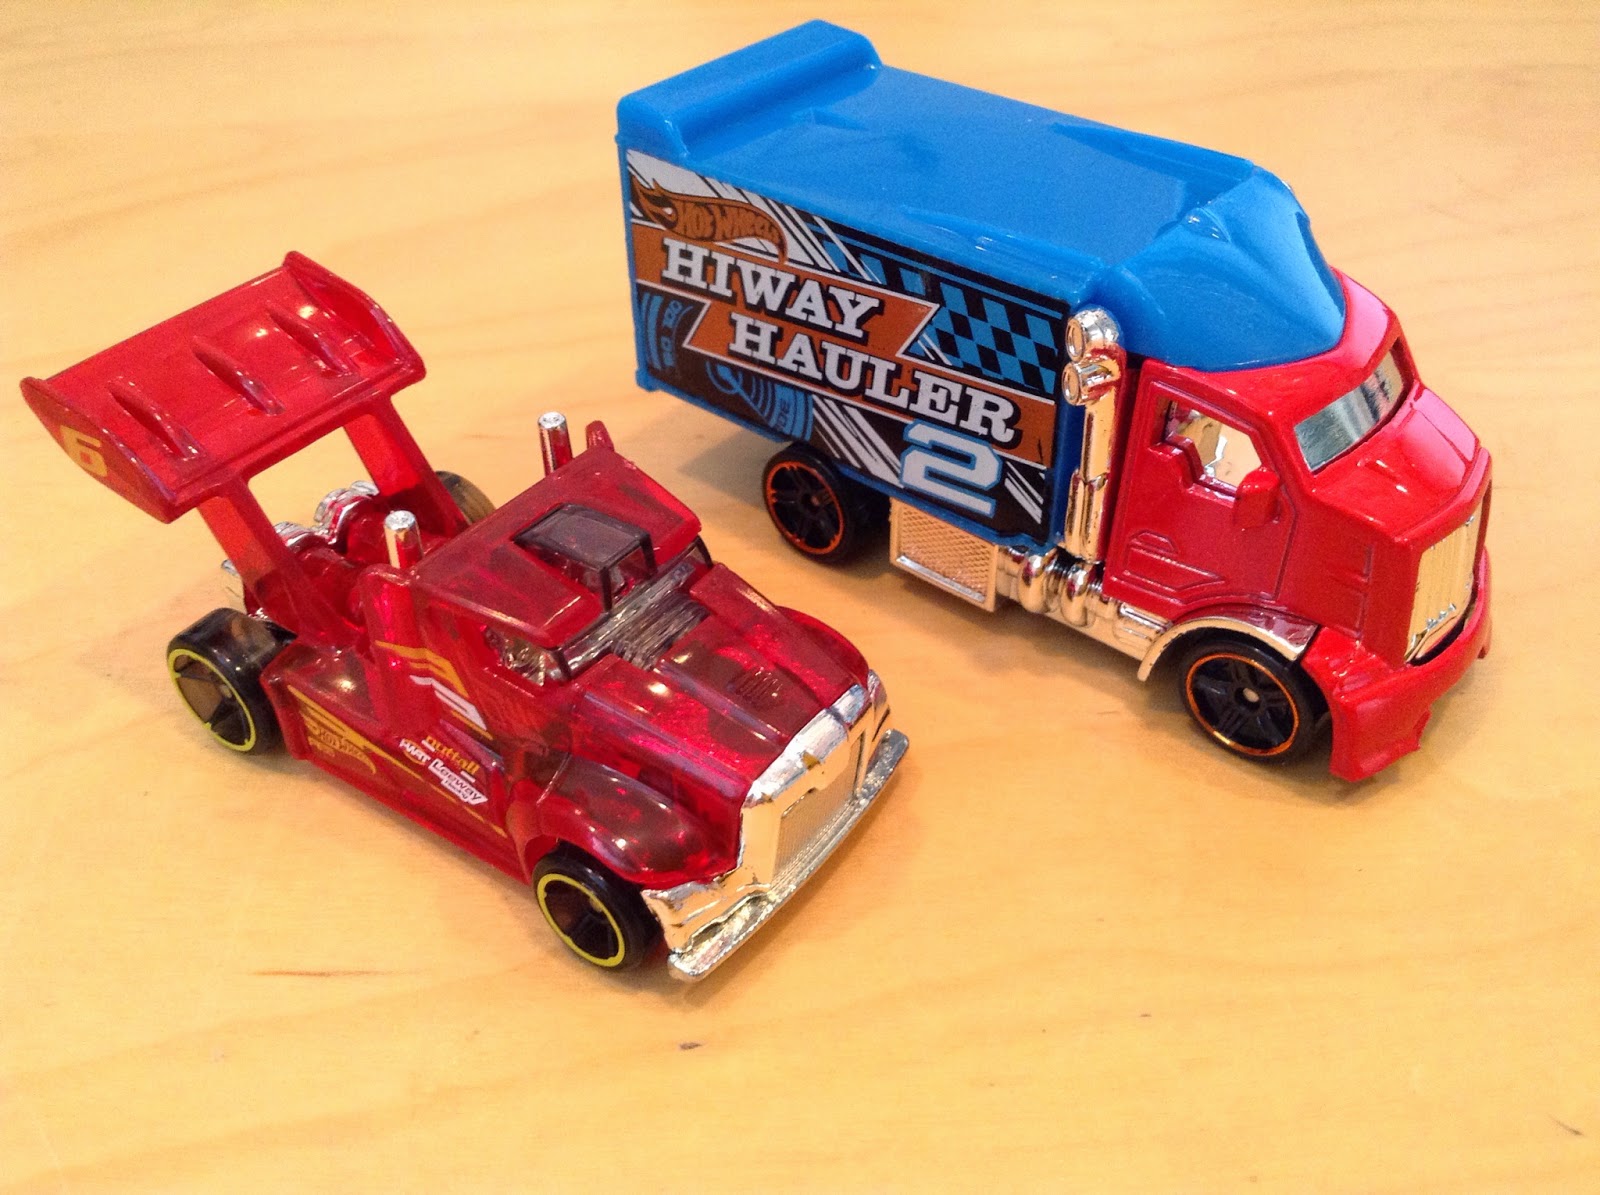 The translucent red truck that looks like its made for drag racing is the R...